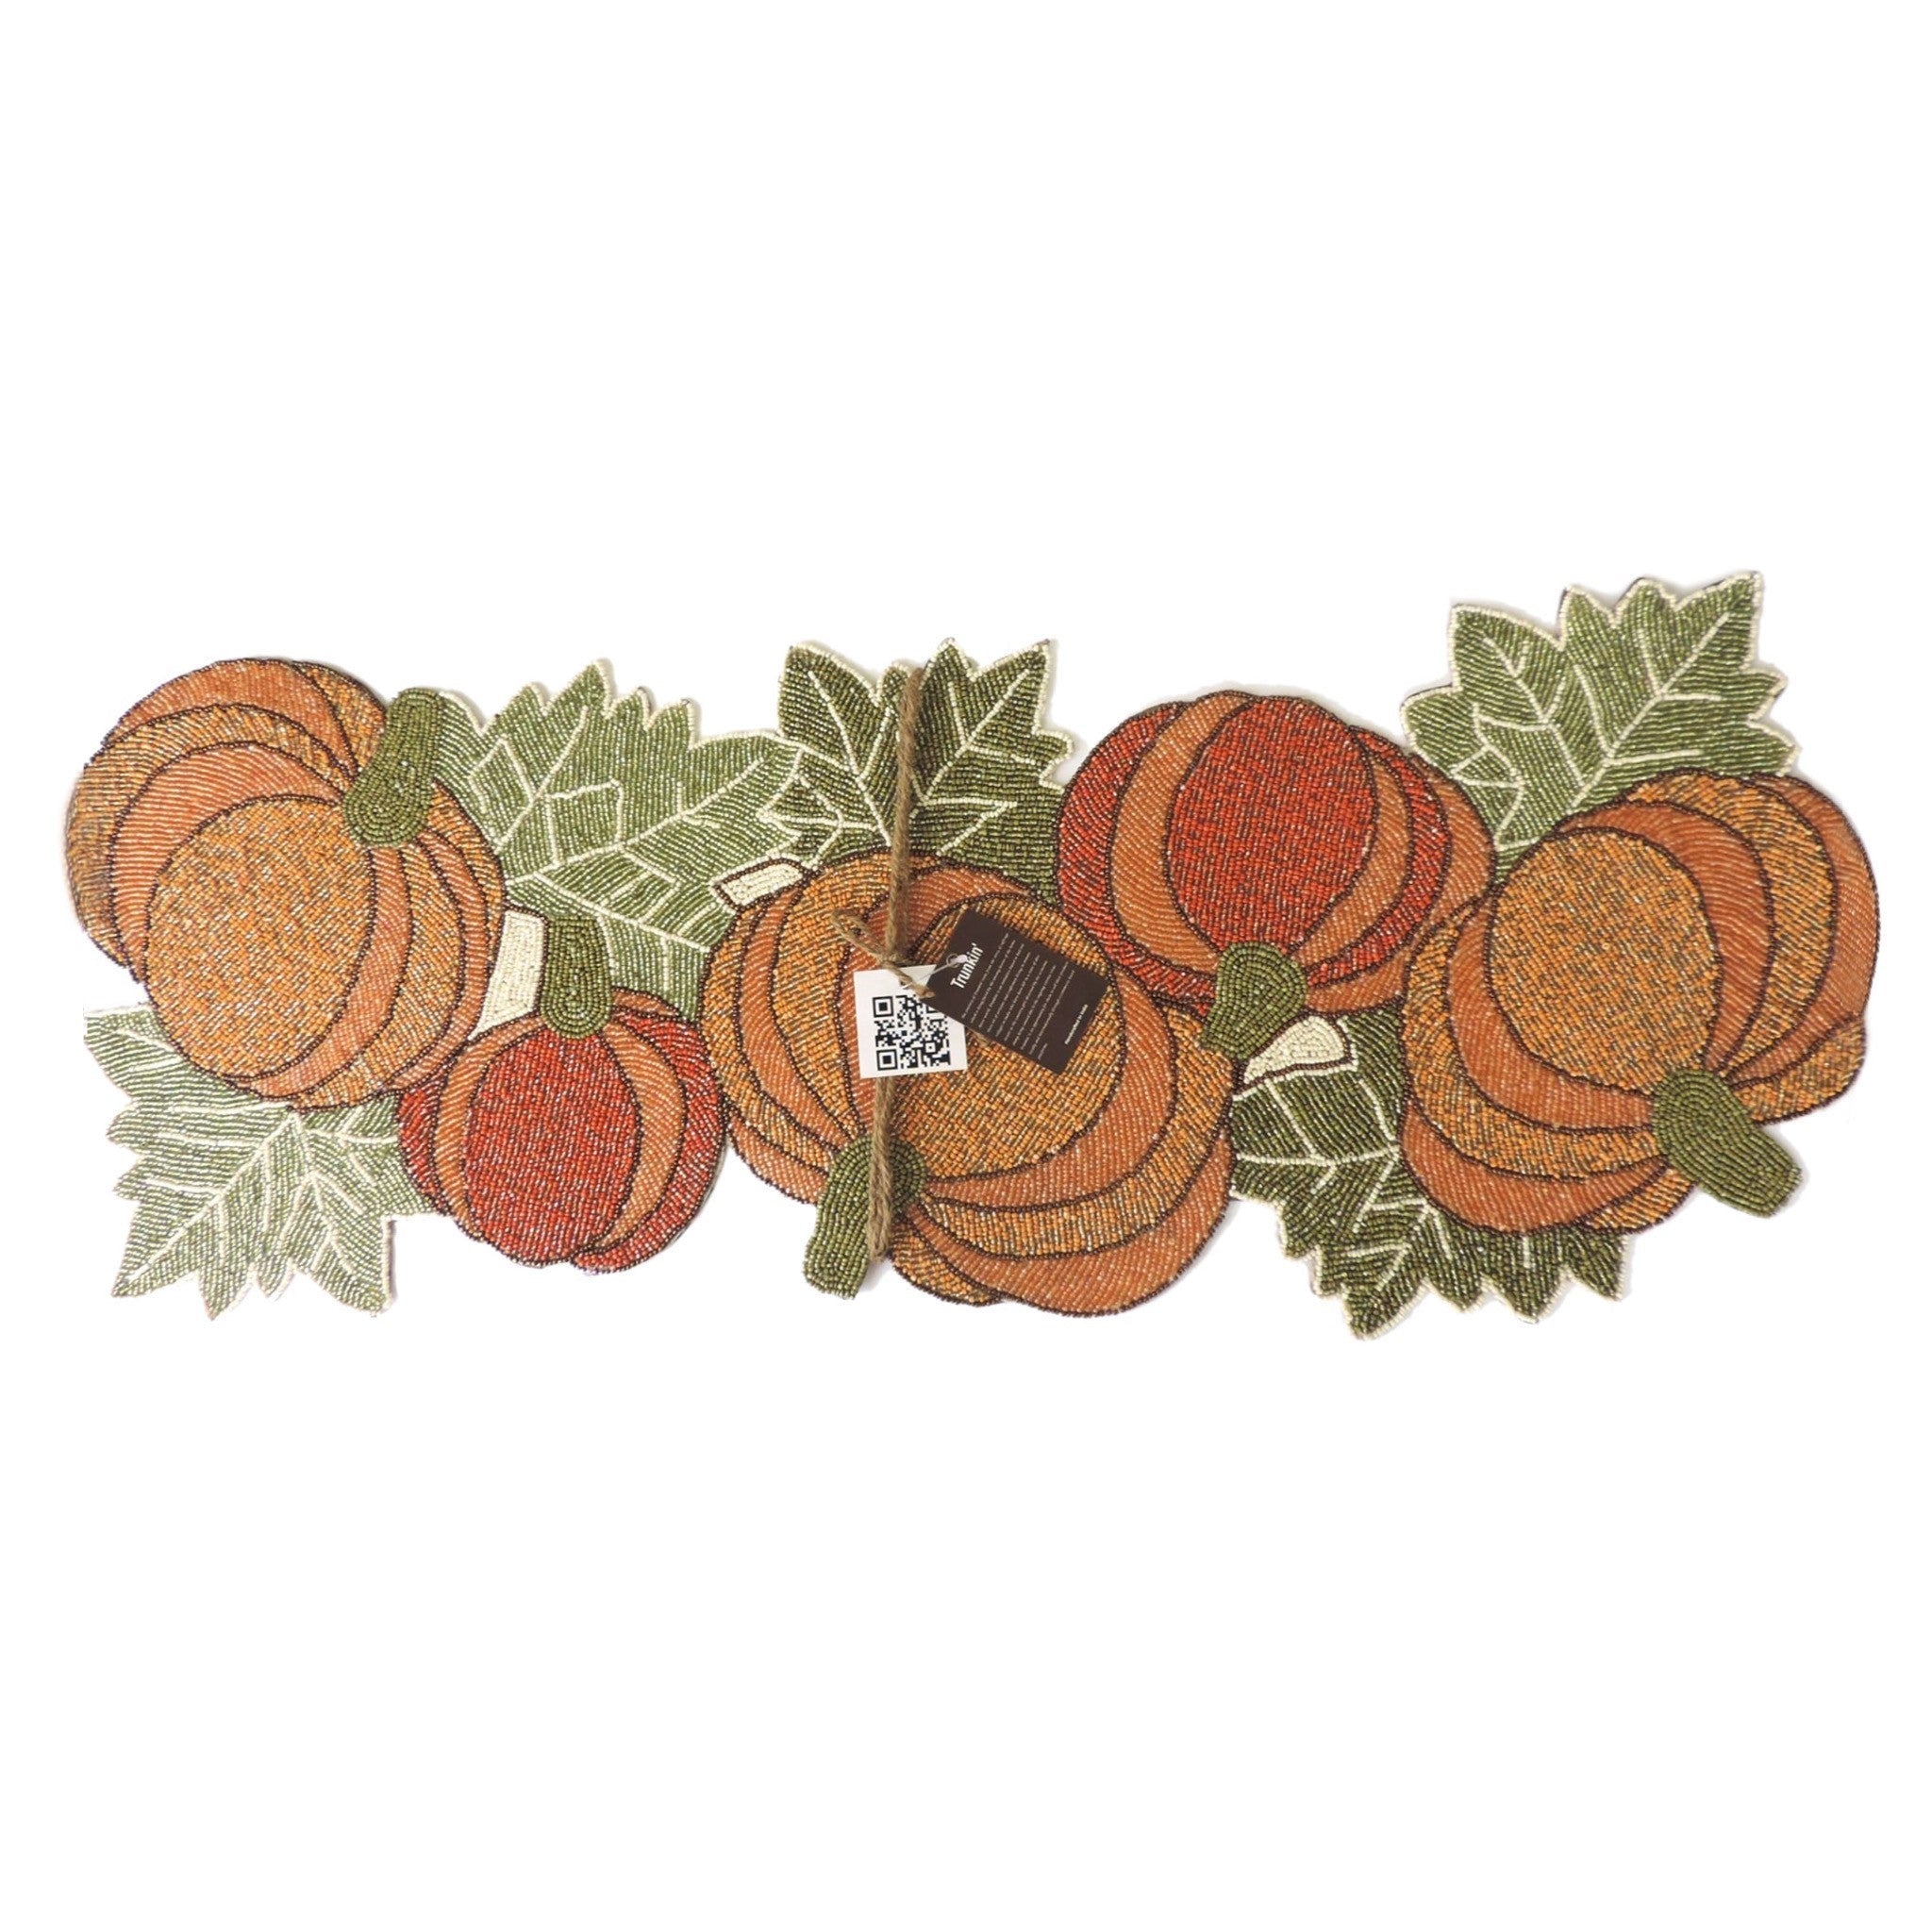 Harvest Pumpkin Glass Bead Embroidered Table Runner in Autumn Colors